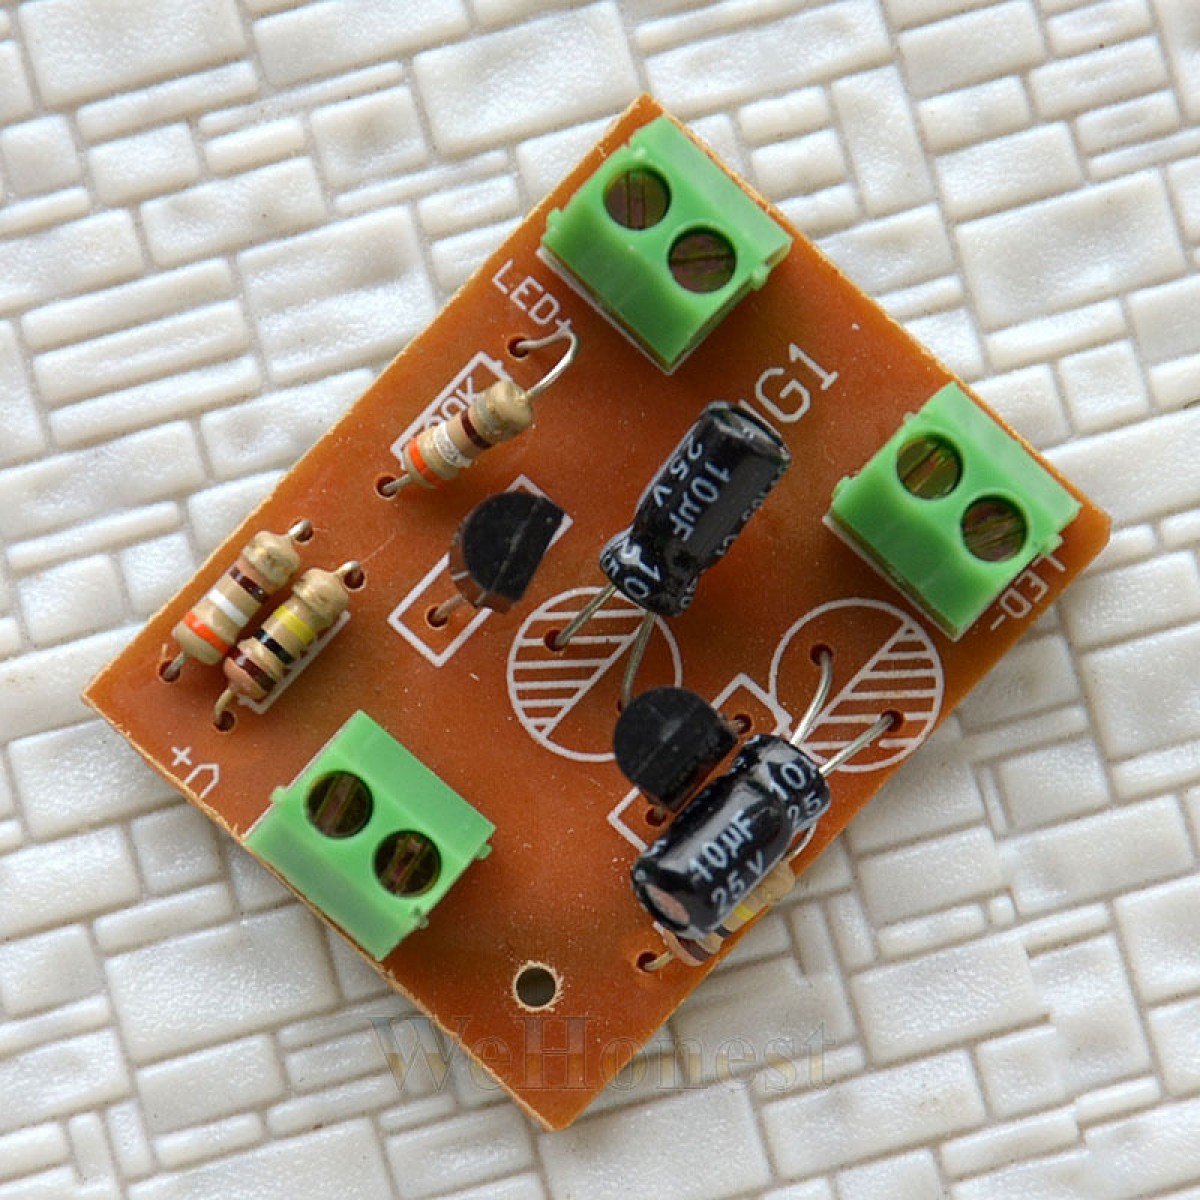 1 pcs compact Circuit Board to make the crossing signals flash Alternately